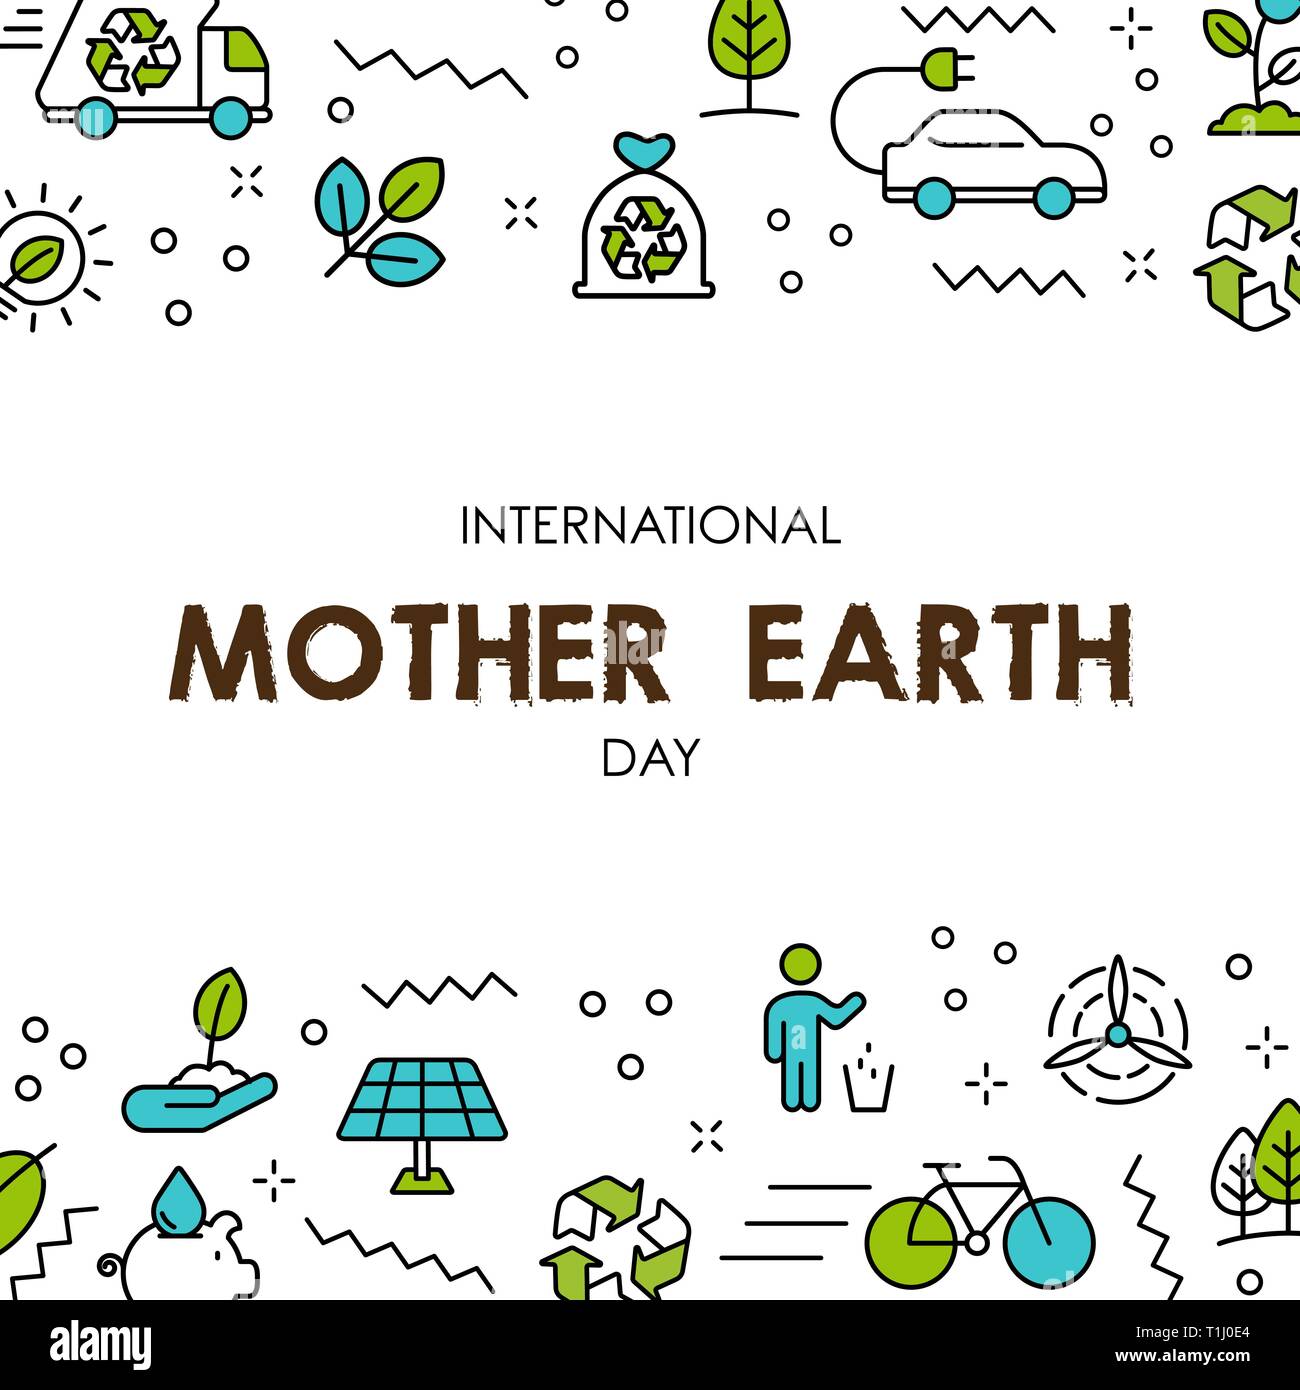 International Earth Day illustration. Green line icons and symbols for eco friendly activities, social environment awareness concept. Stock Vector